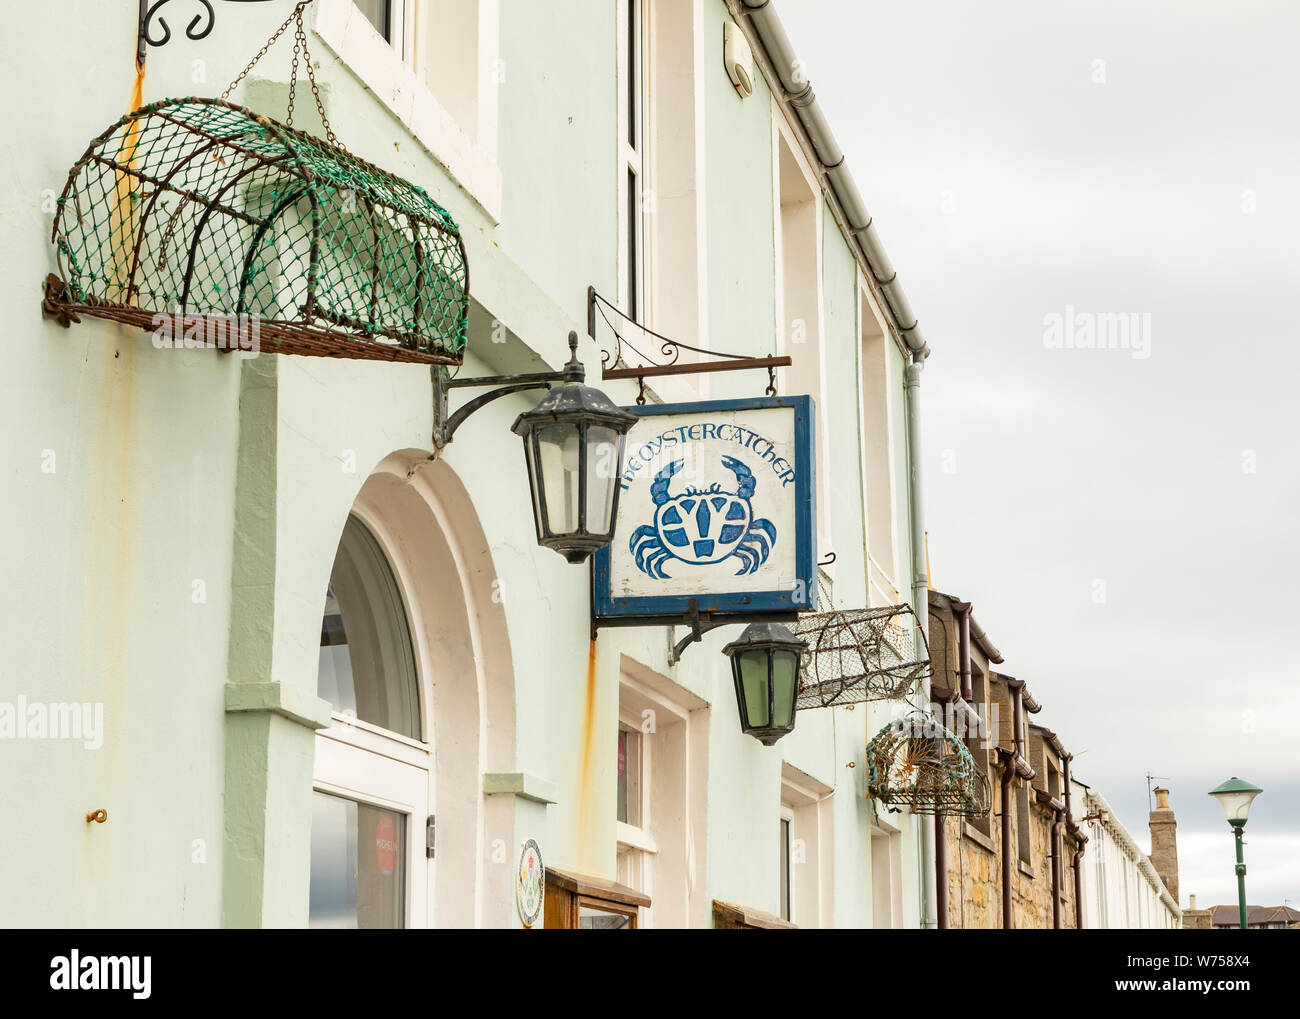 street front of Portmahomack with restaurant sign Stock Photo